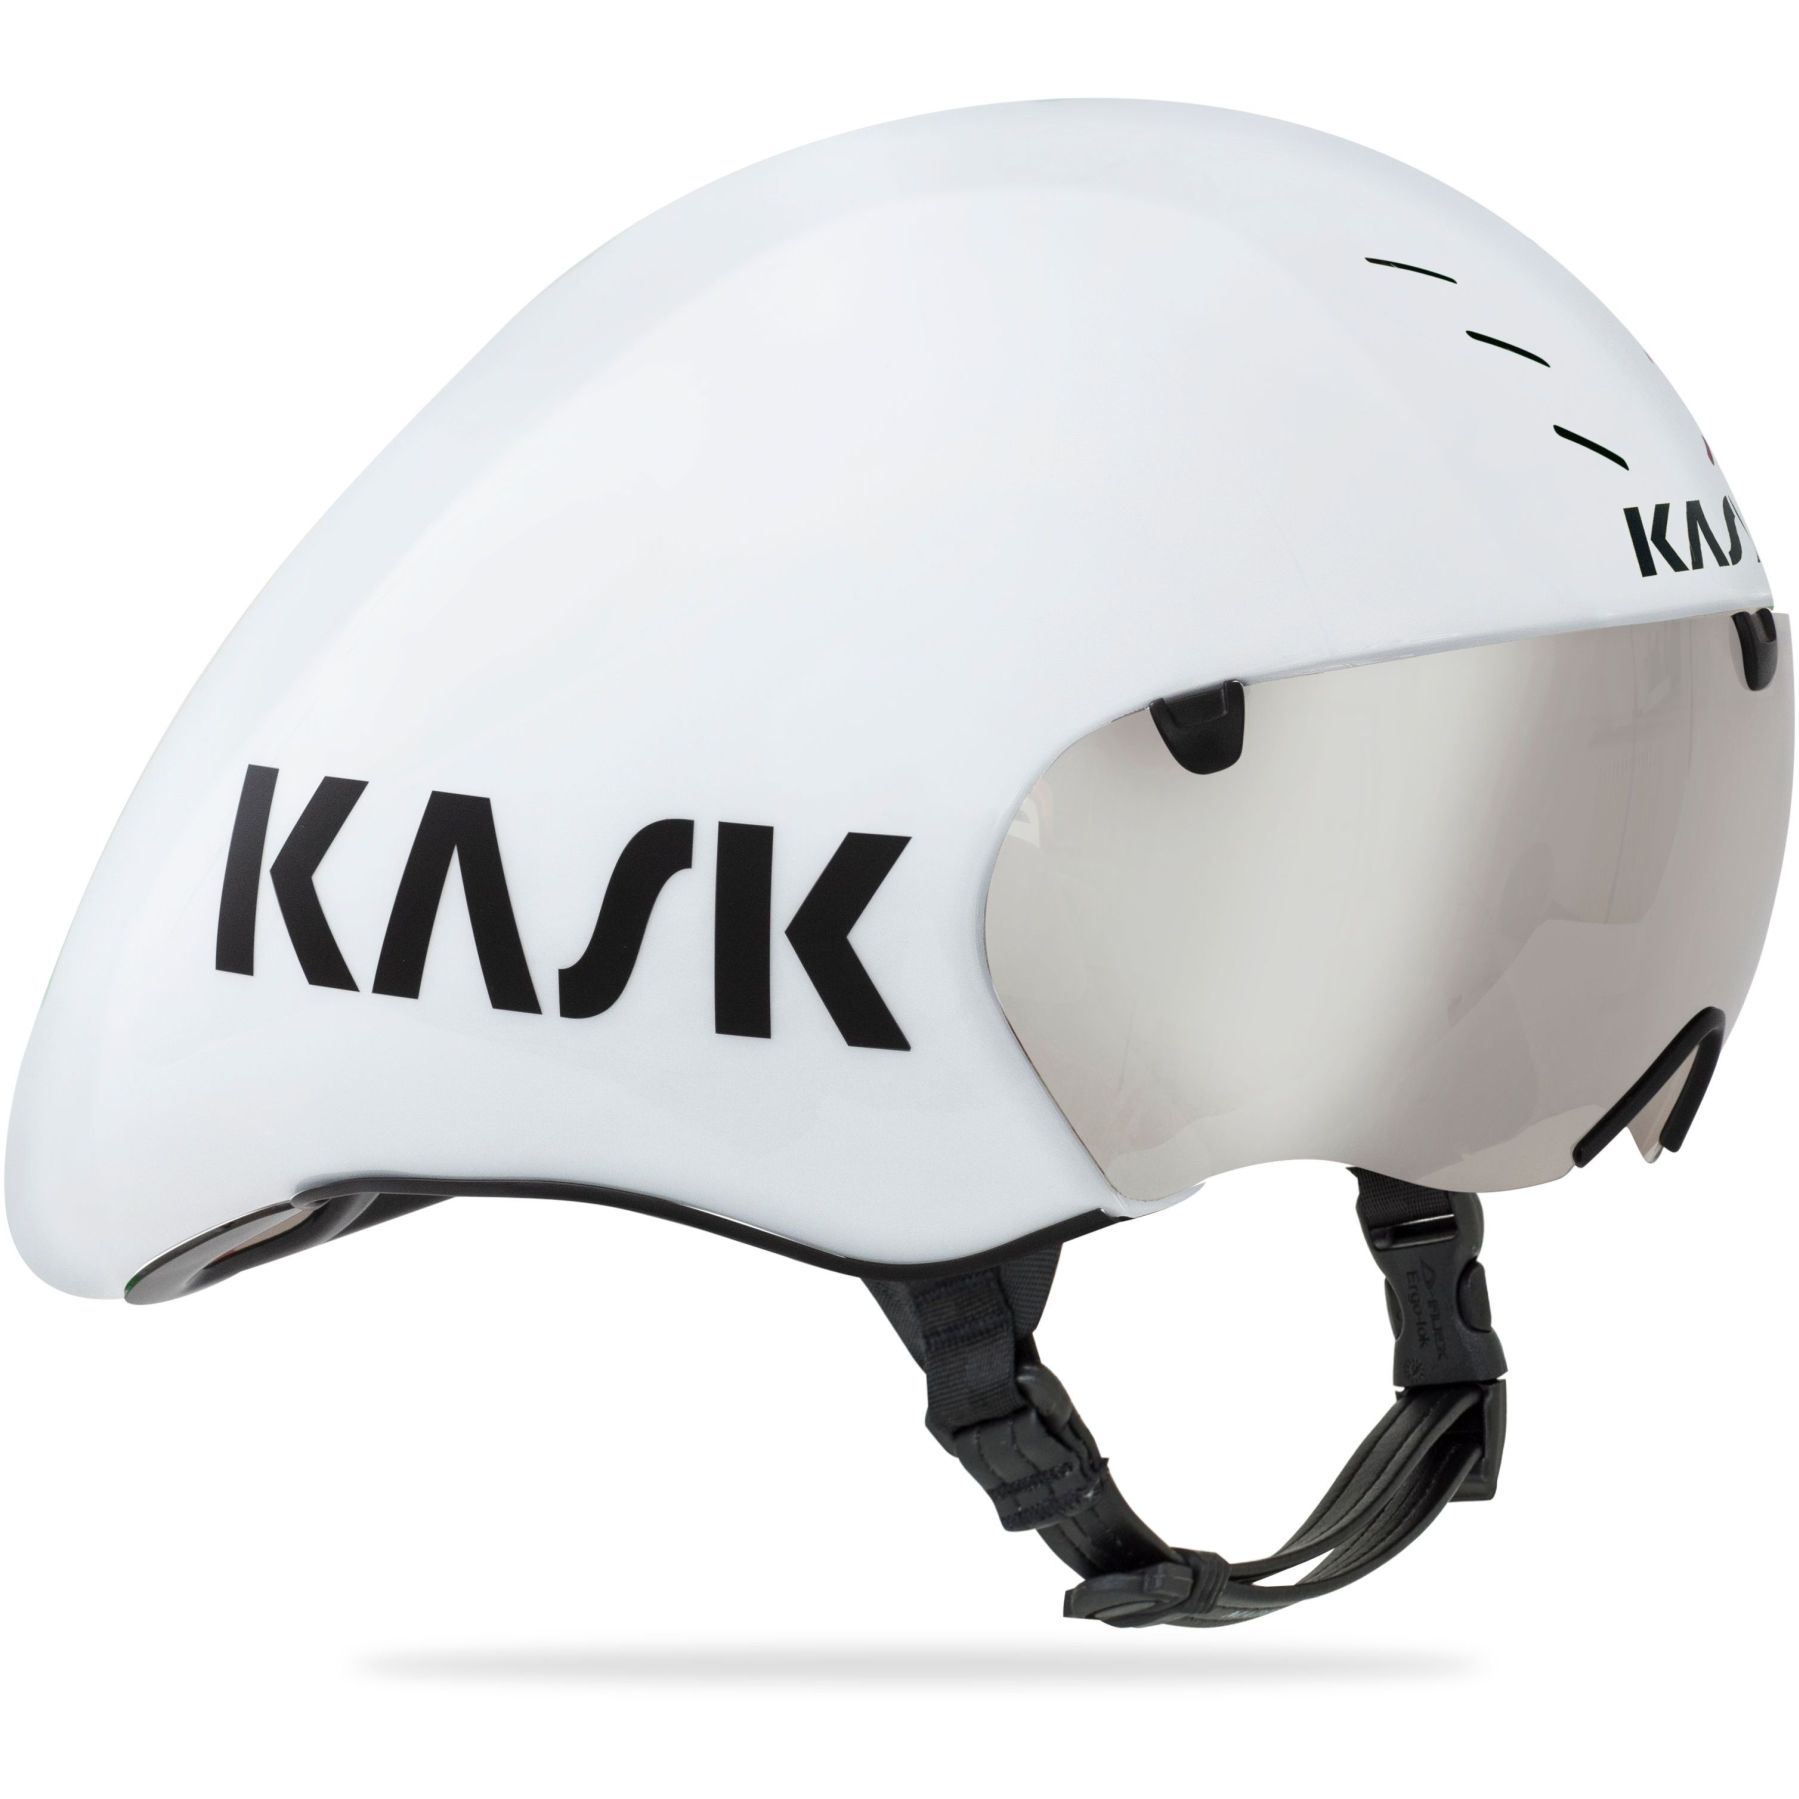 Picture of KASK Bambino Pro Evo Time Trial Helmet - White